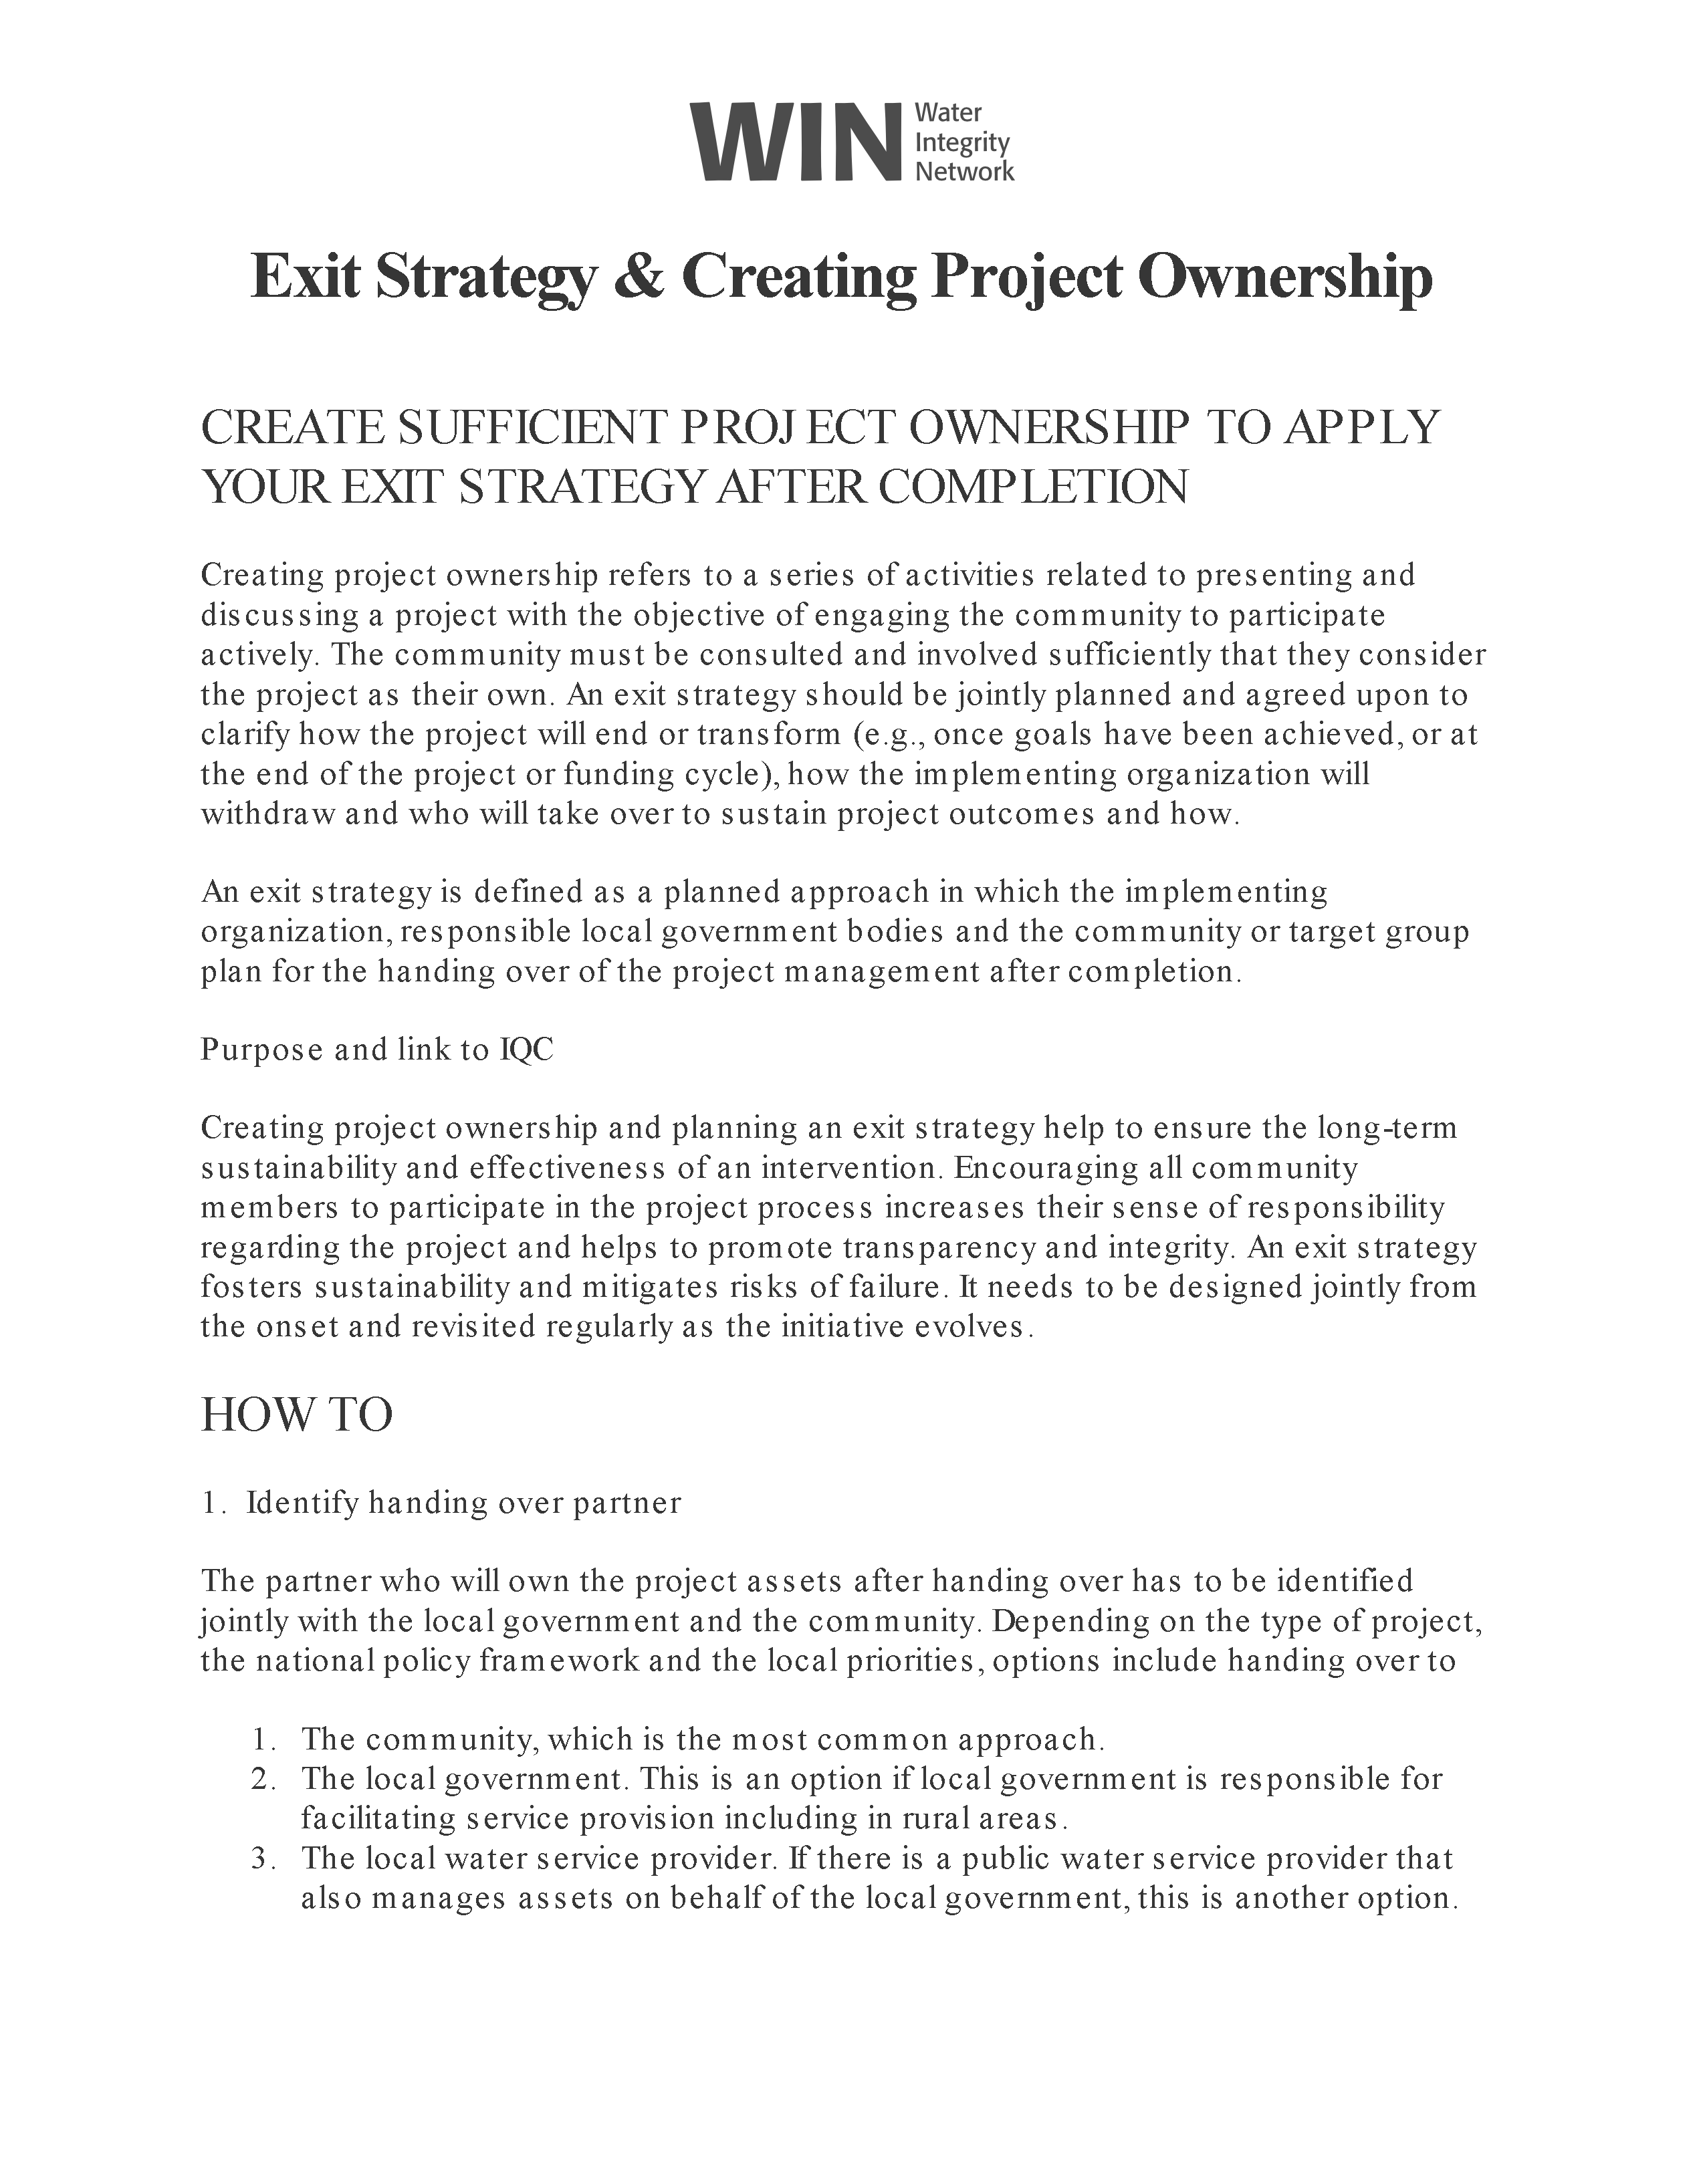 Cover page for Exit Strategy & Creating Project Ownership